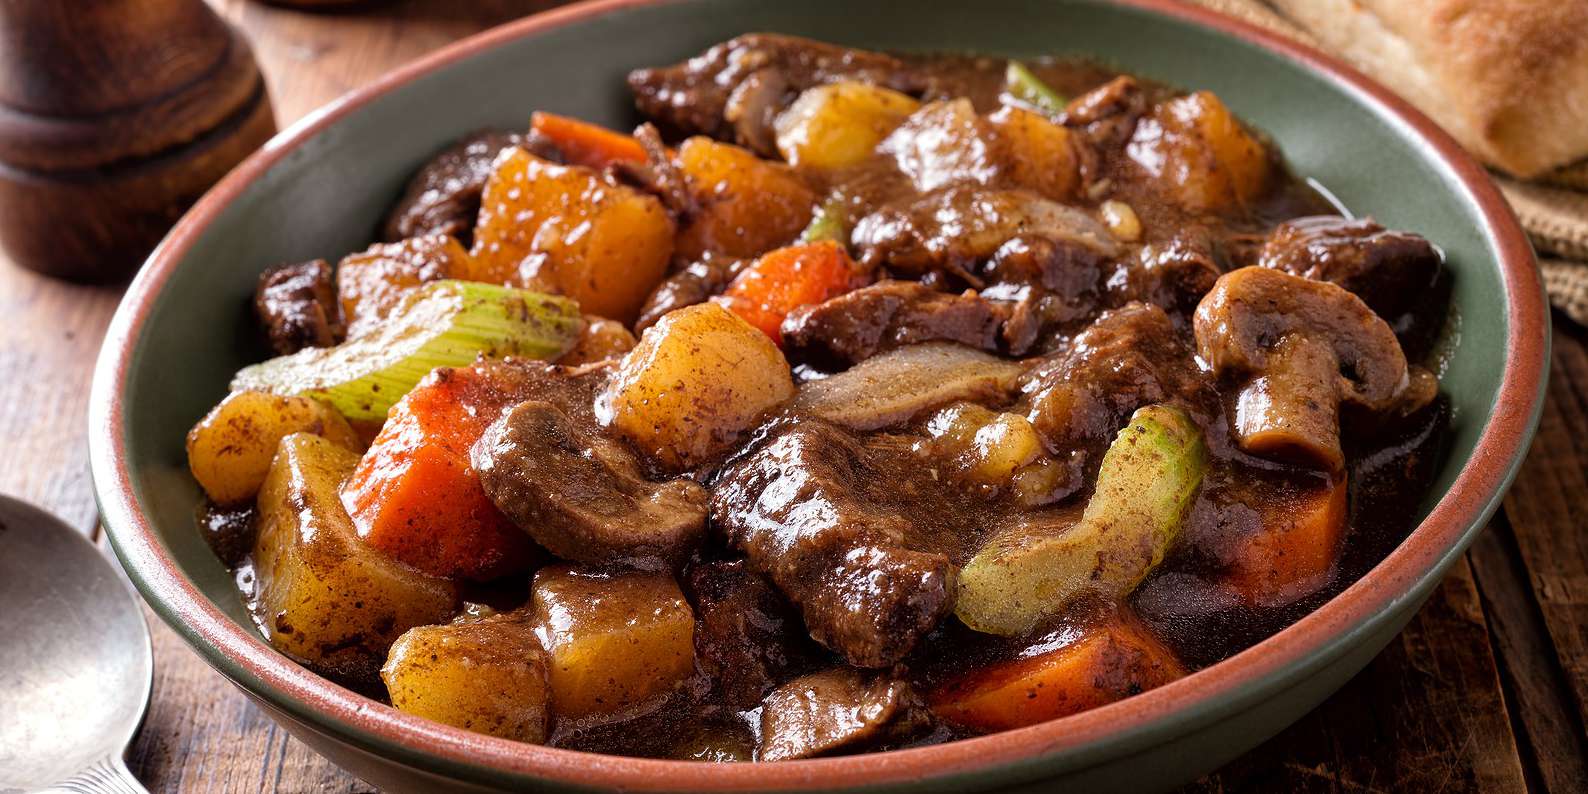 Beef Stew with Turnip, Mushrooms, and Potatoes